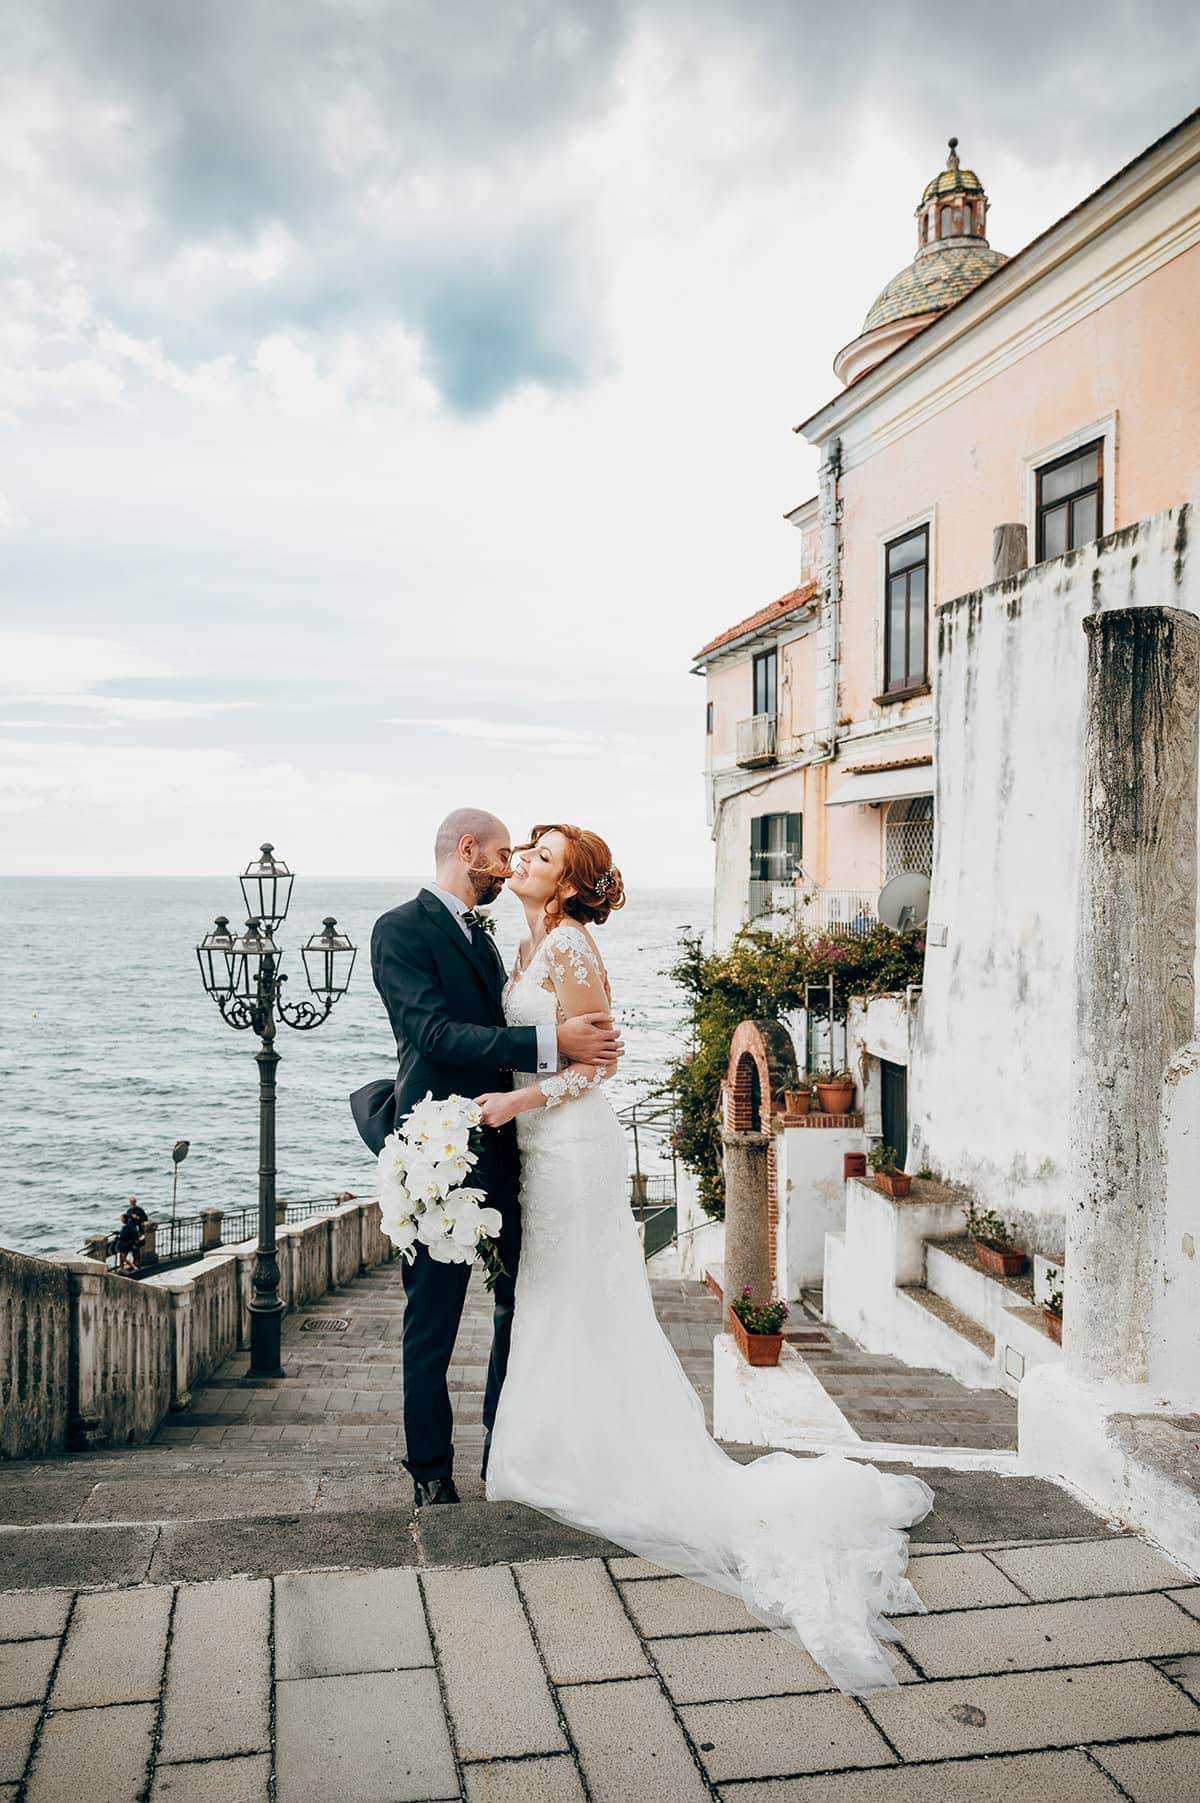 Wedding Proposal at Belmond Hotel Caruso in Ravello - Best 5